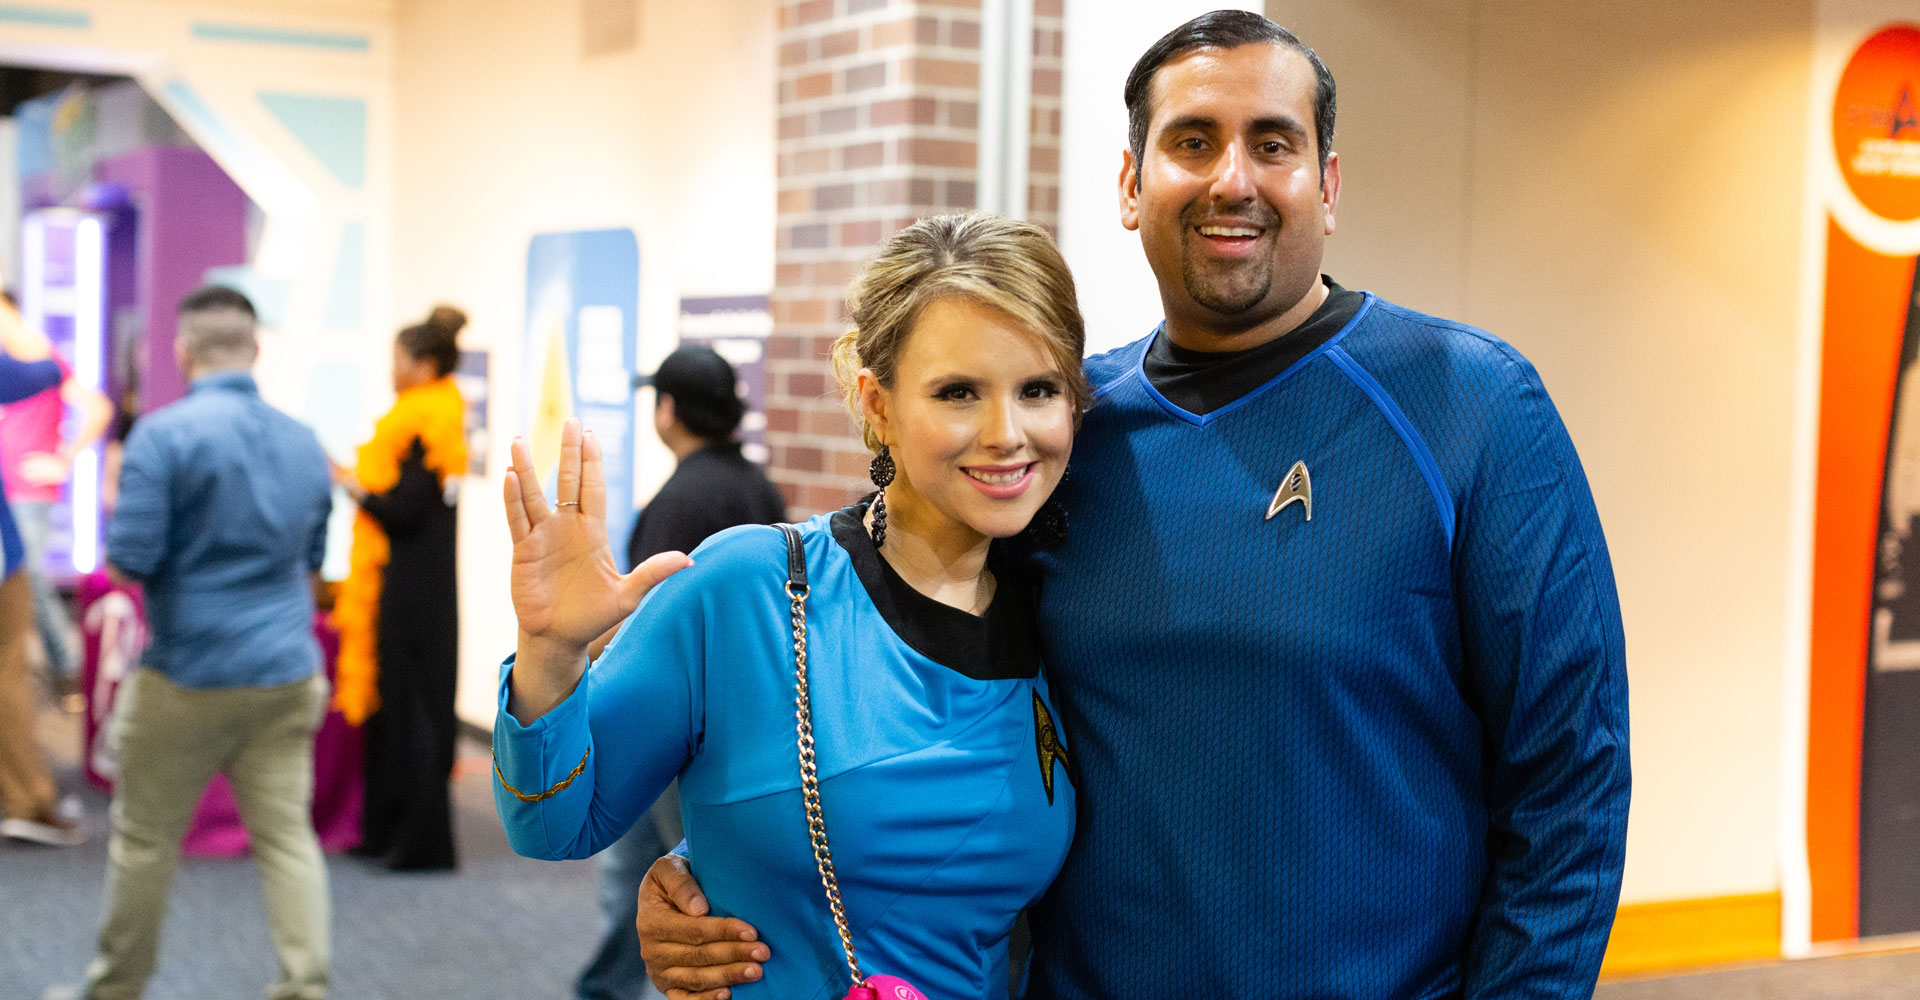 Man and woman wearing blue Star Trek costumes. Woman is making the Vulcan salute with her hand.